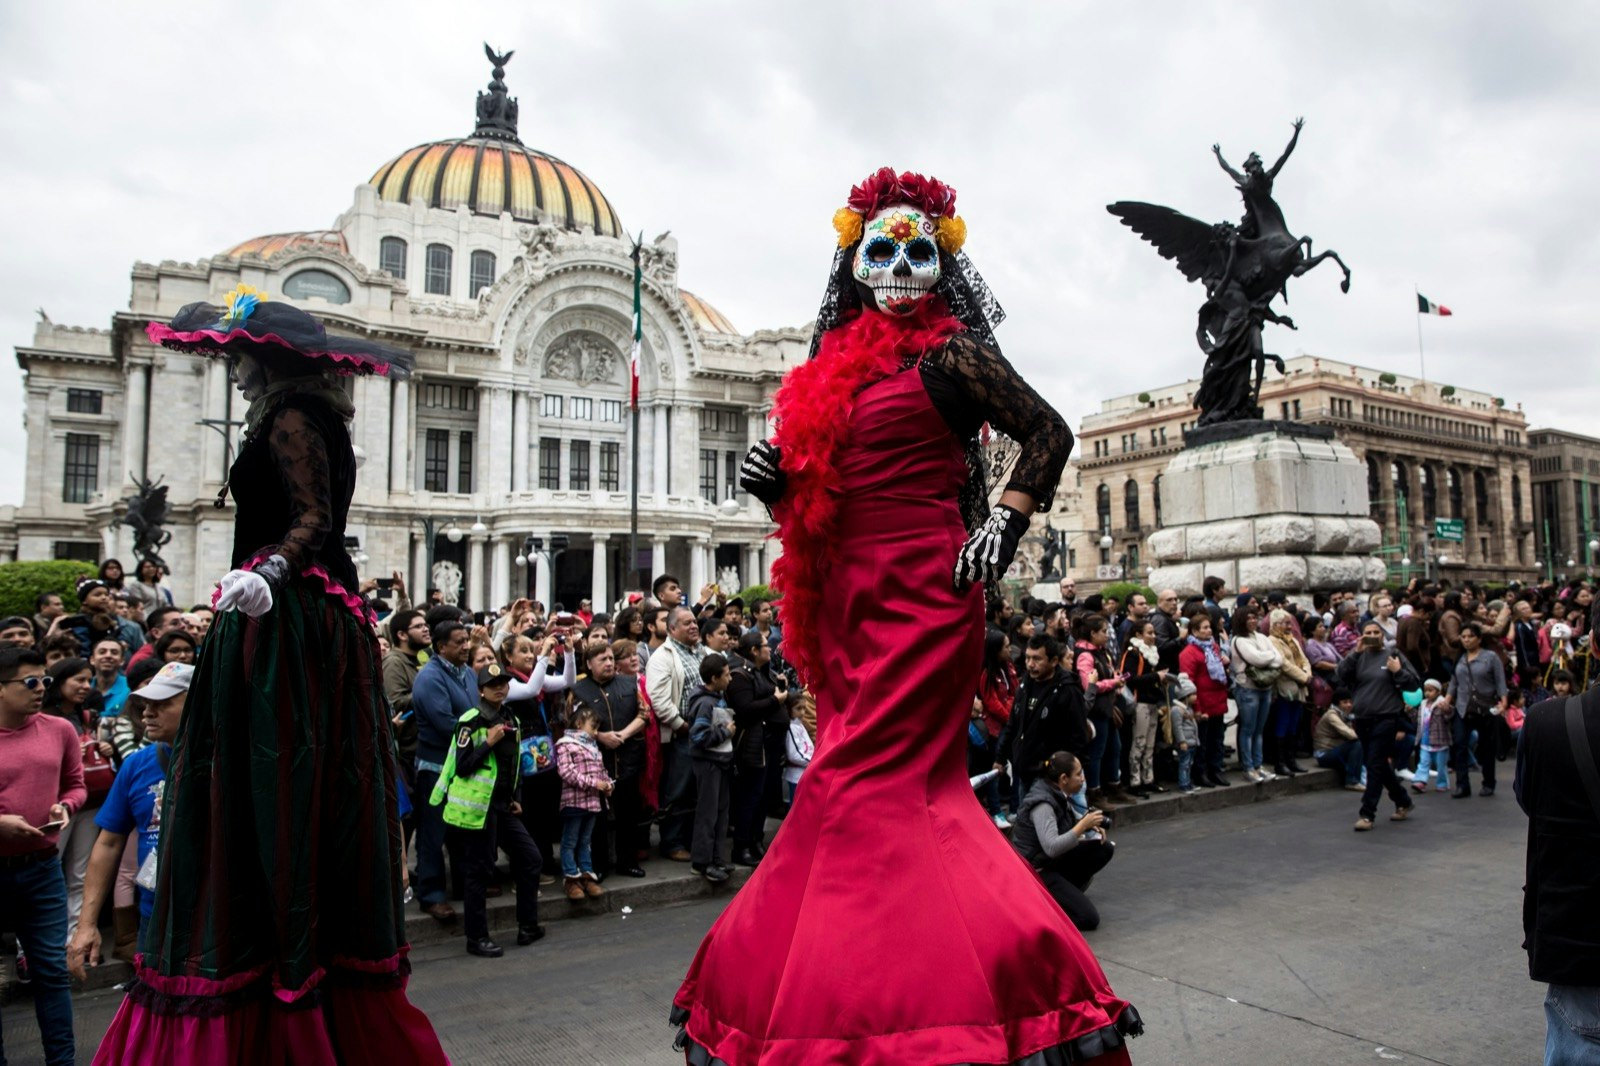 Performers in opulent clothing fringed with lace and skull masks walk down a road during a Dia de Muertos parade. 